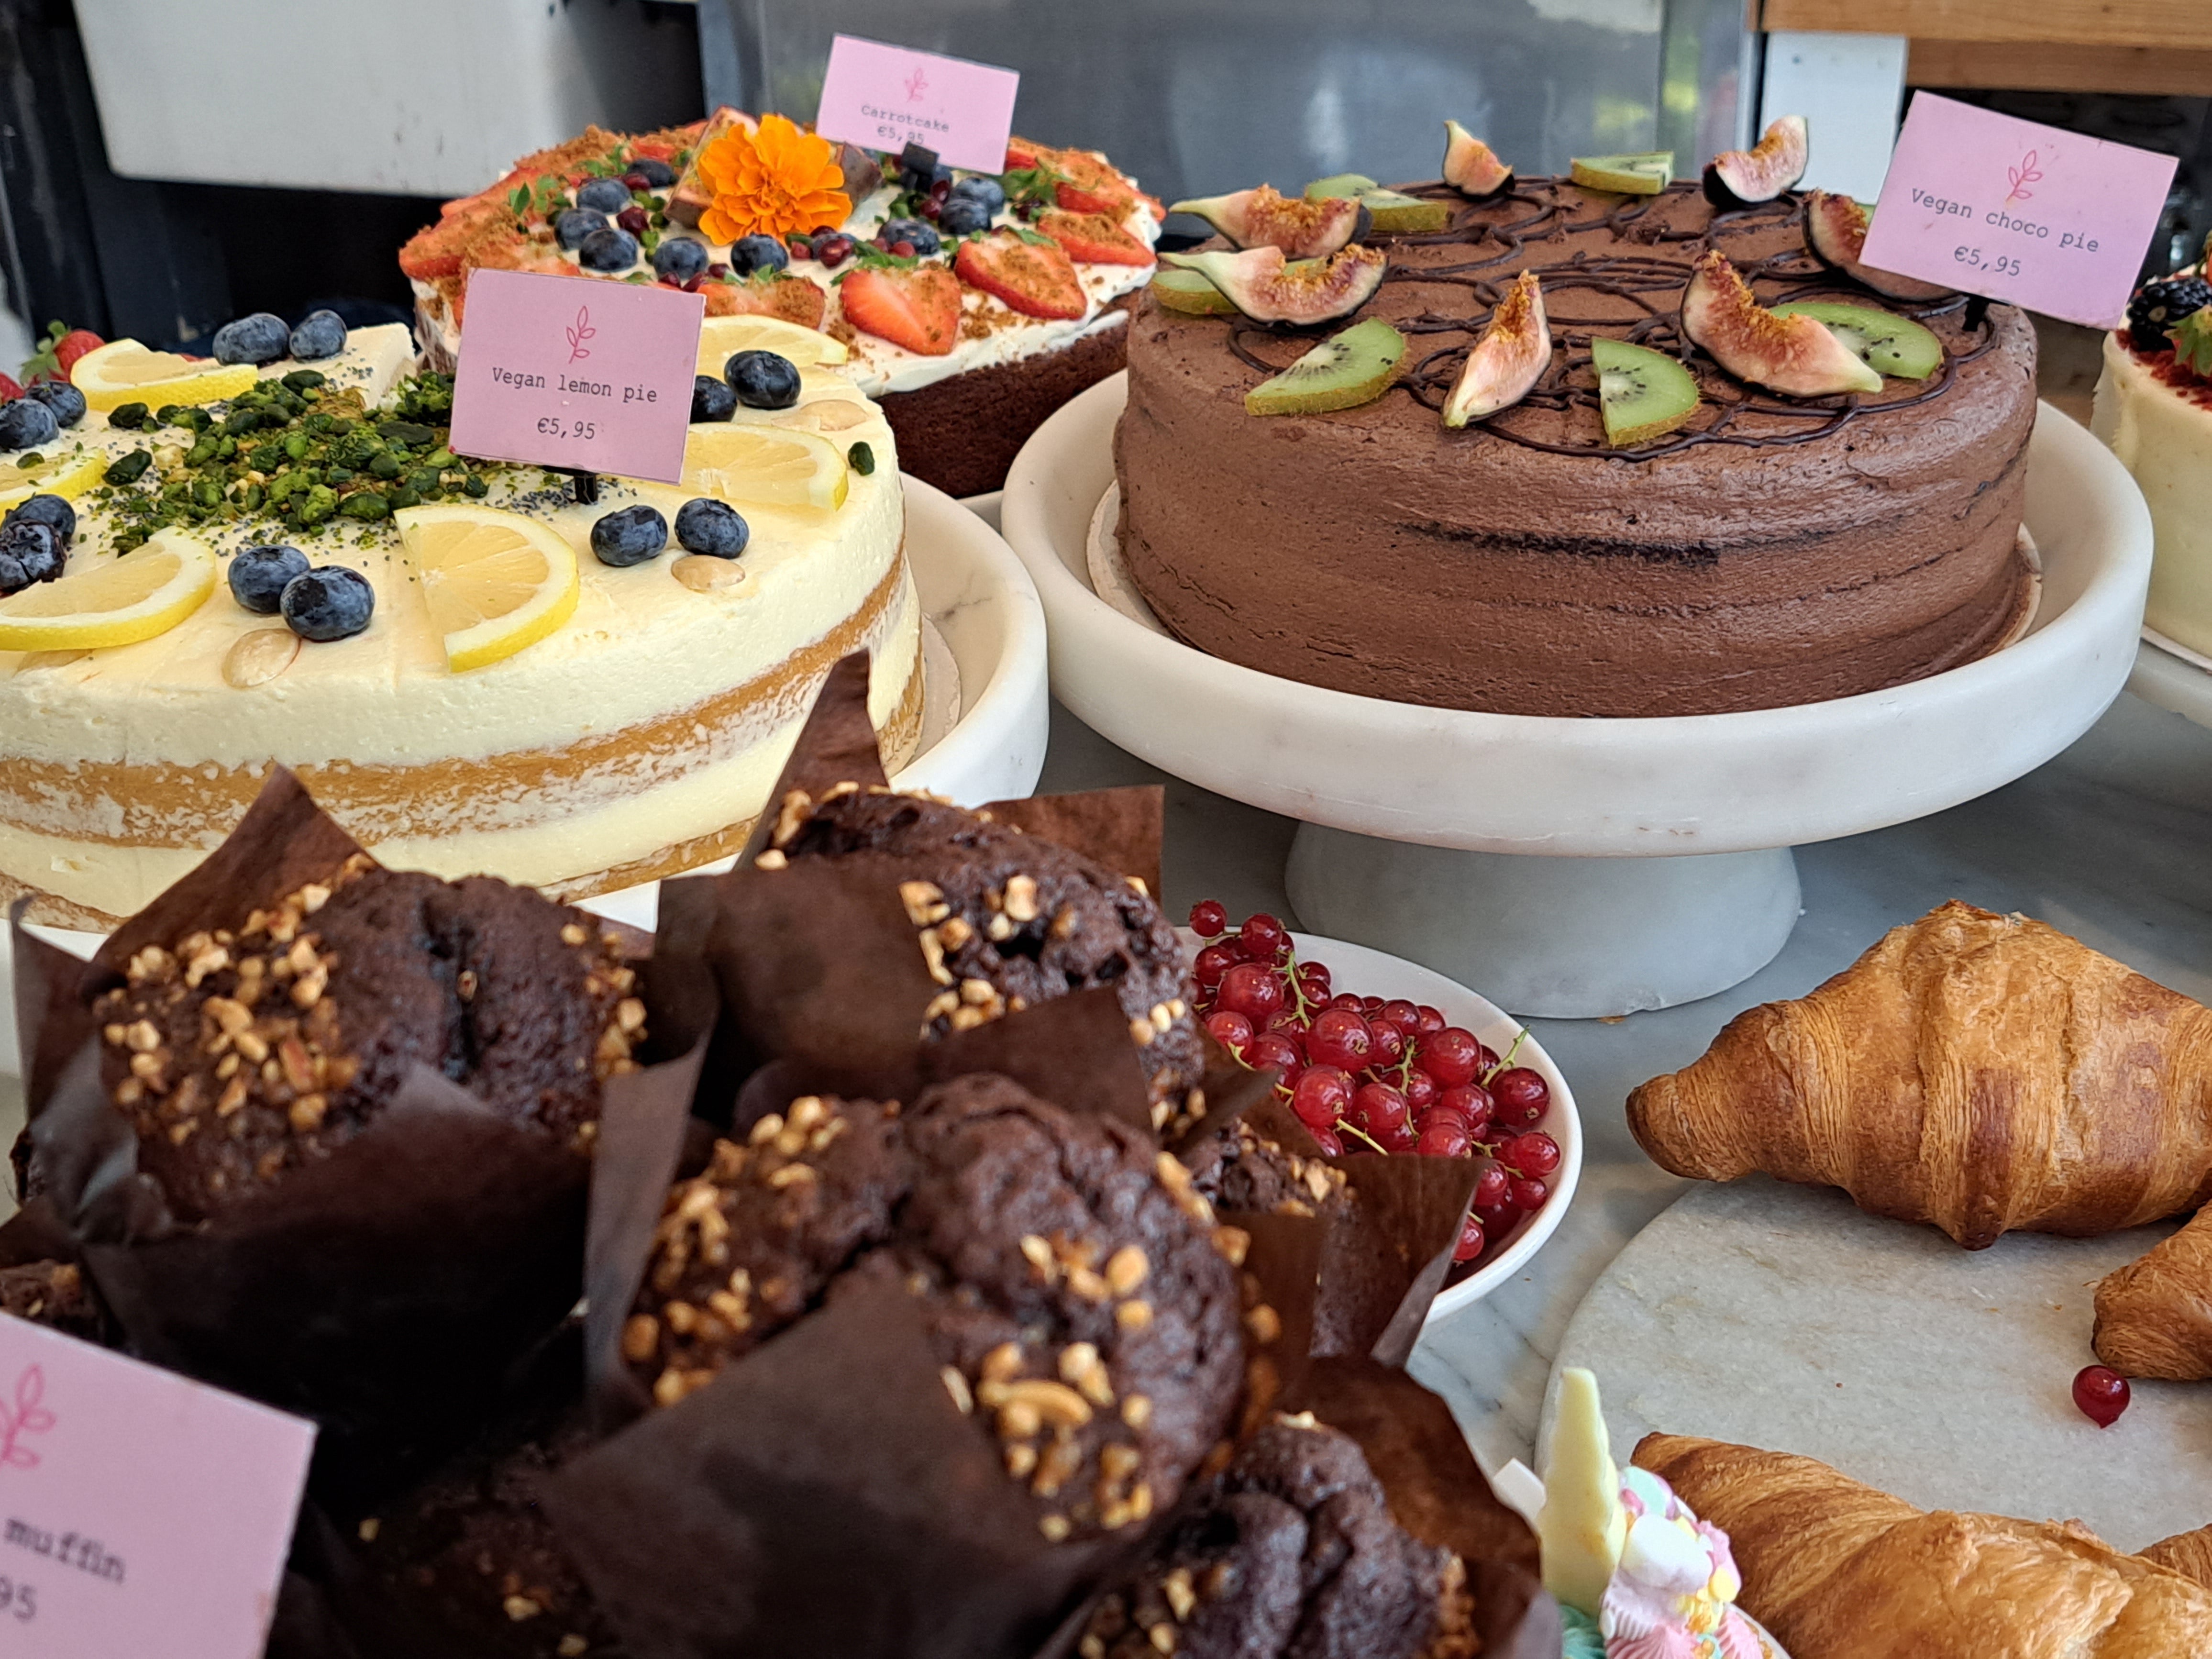 Don’t miss out on a vegan cake from Pluk